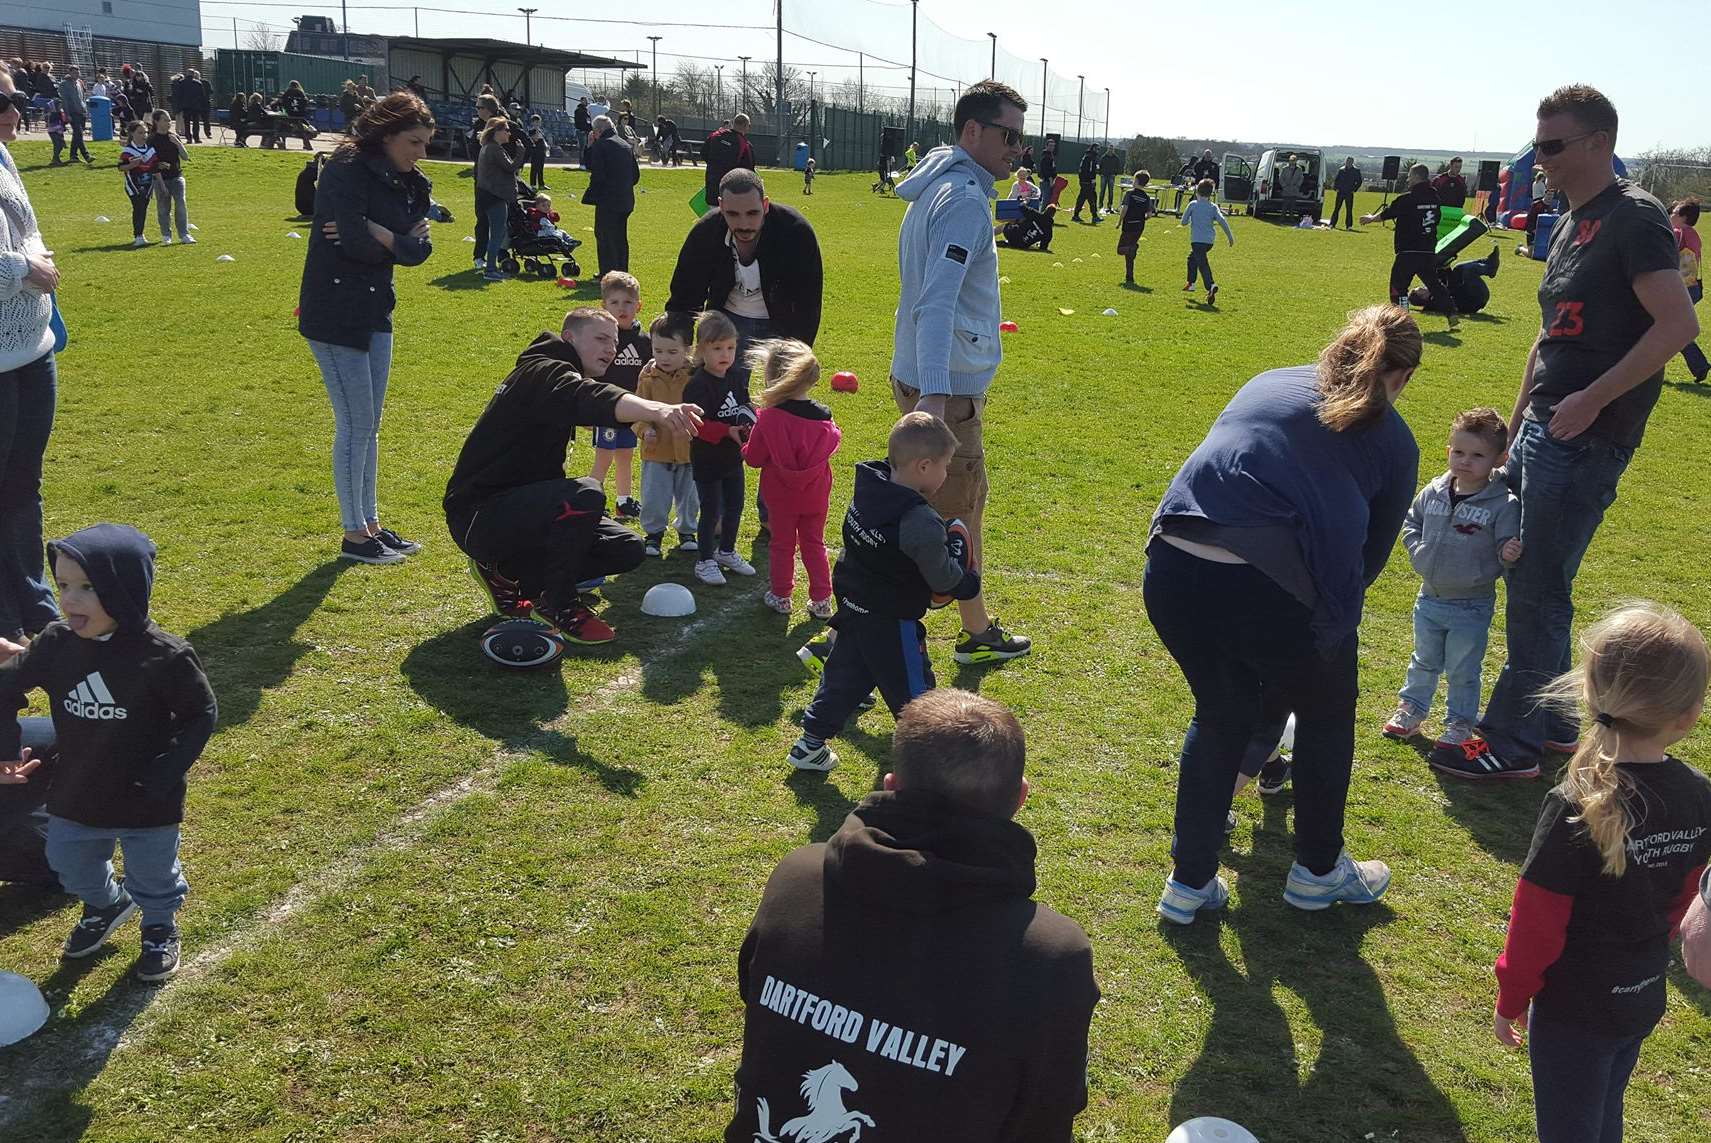 Over 120 youngsters and their families came to enjoy the sunshine